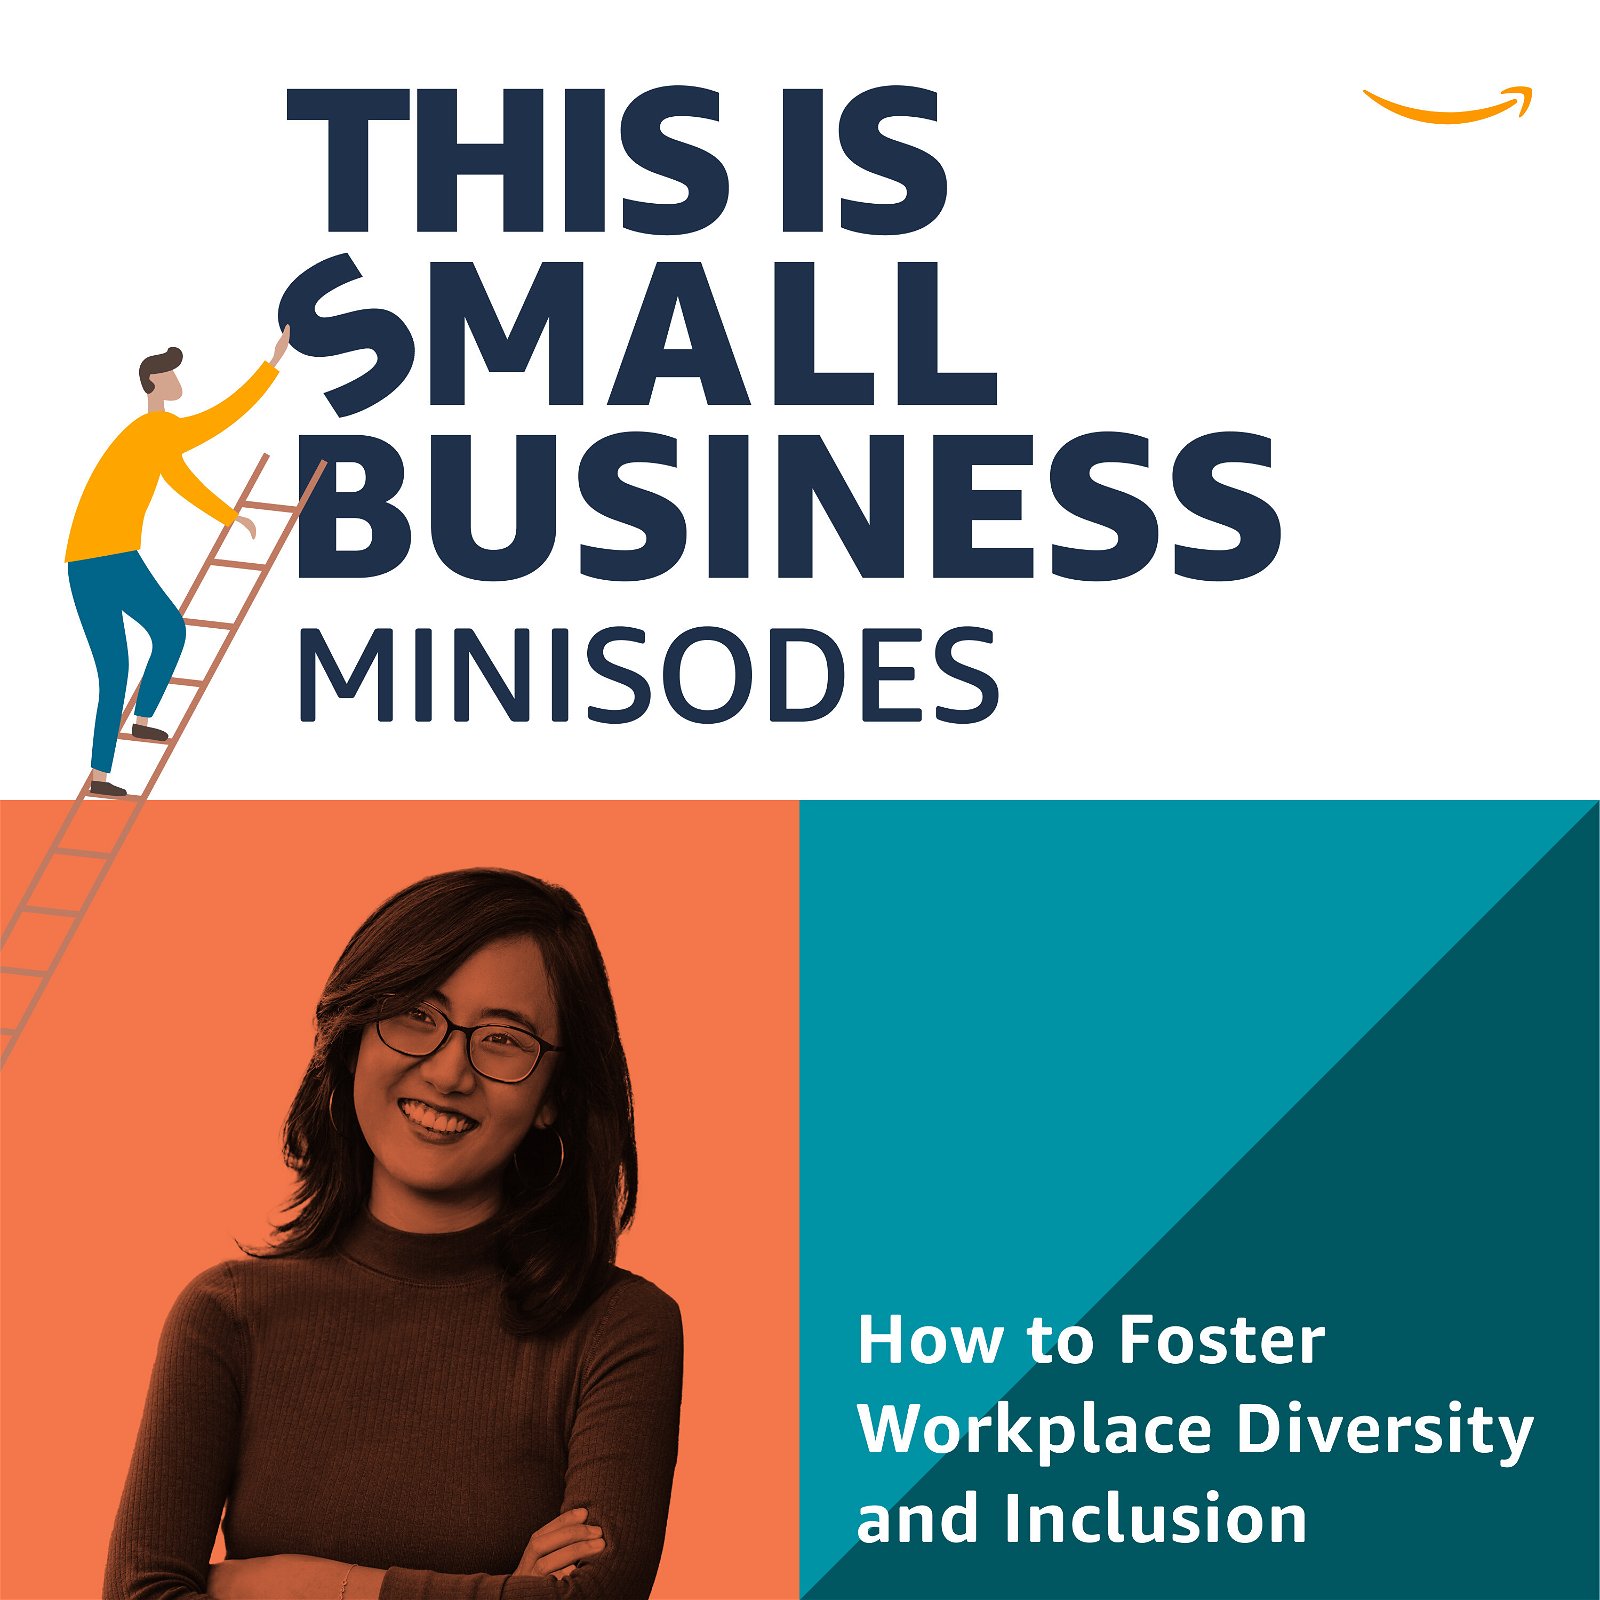 How to Foster Workplace Diversity and Inclusion